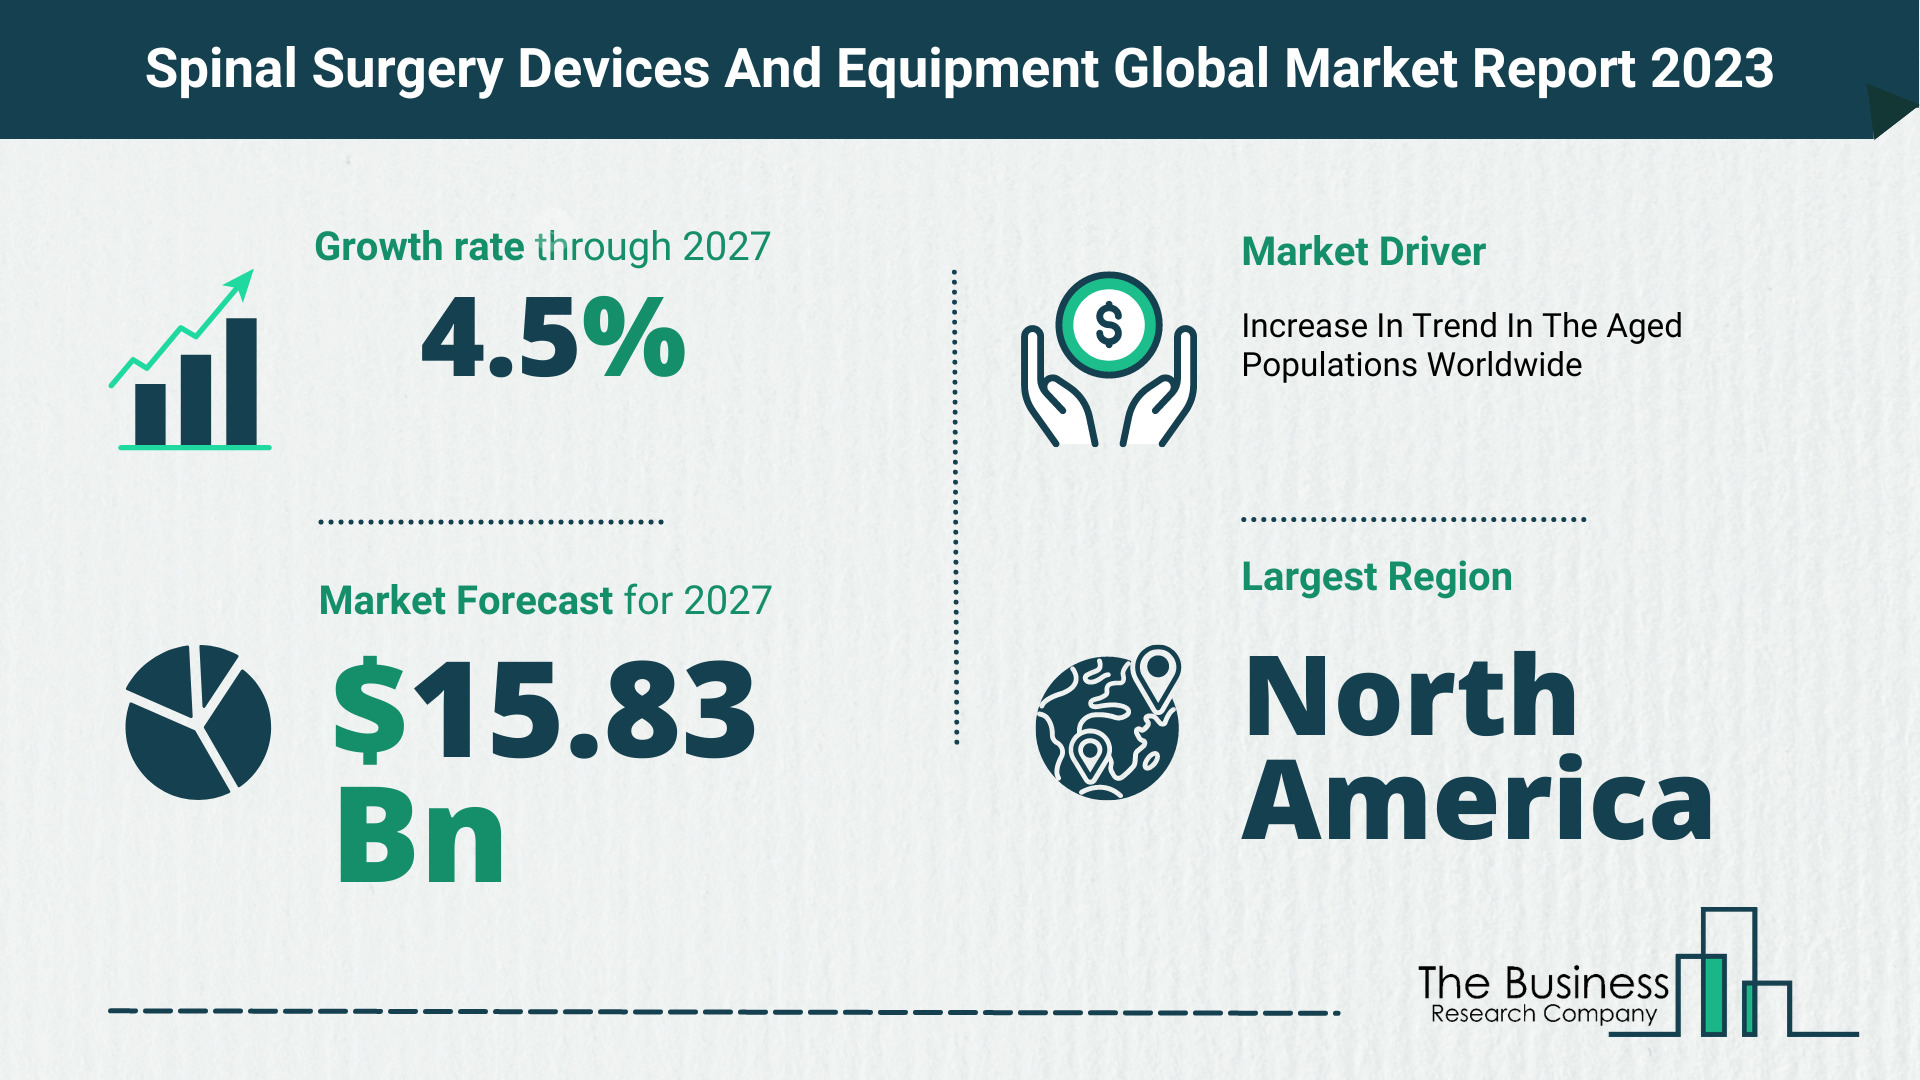 What Will The Spinal Surgery Devices And Equipment Market Look Like In 2023?